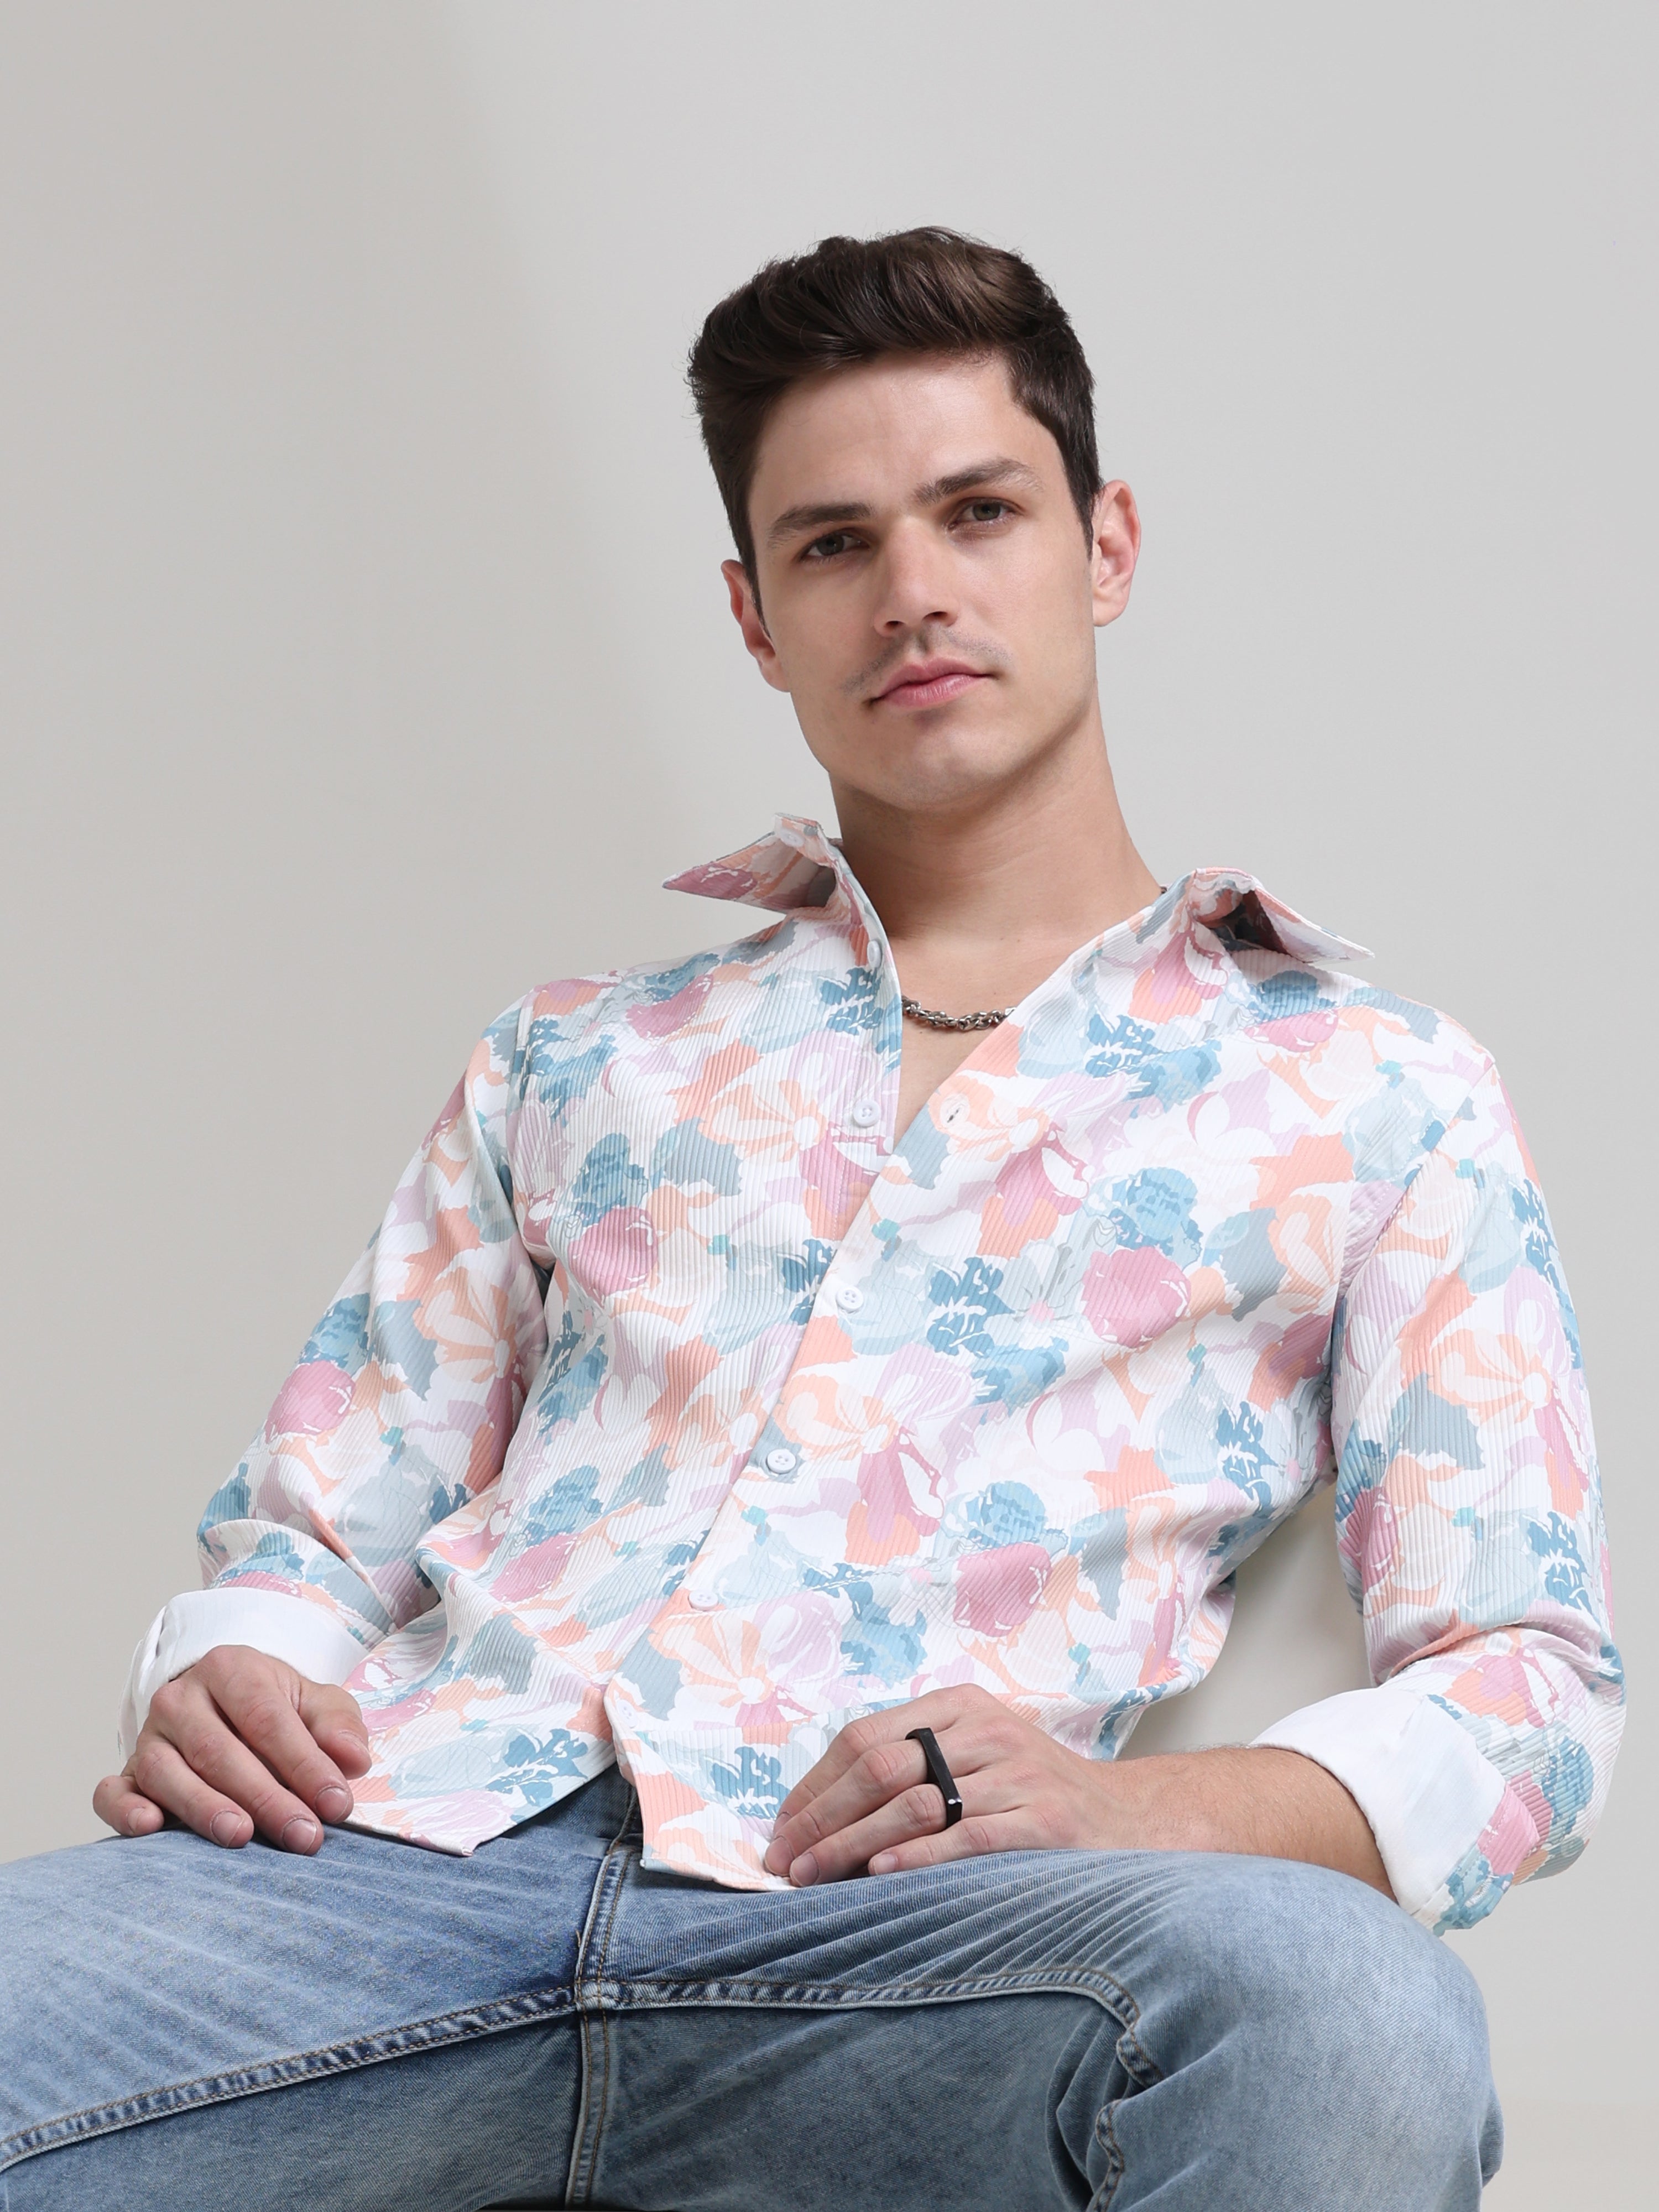 Blush Blossom: Printed Baby Pink Tapered Fit Full Sleeve Shirt